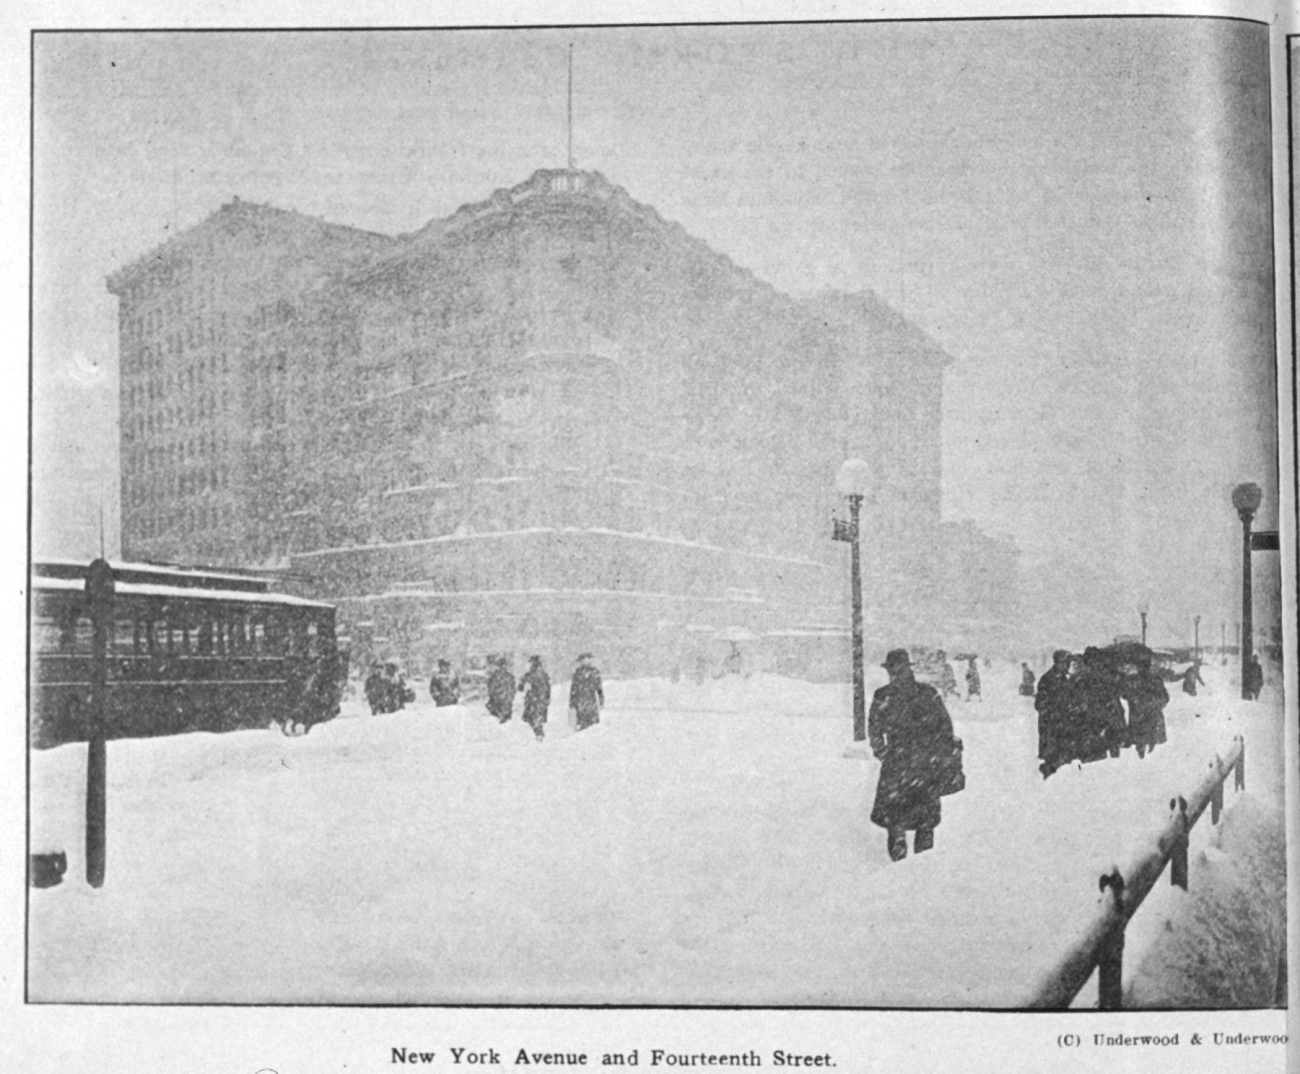 Walking through the snow on New York Avenue and Fourteenth Street during theKnickerbocker storm